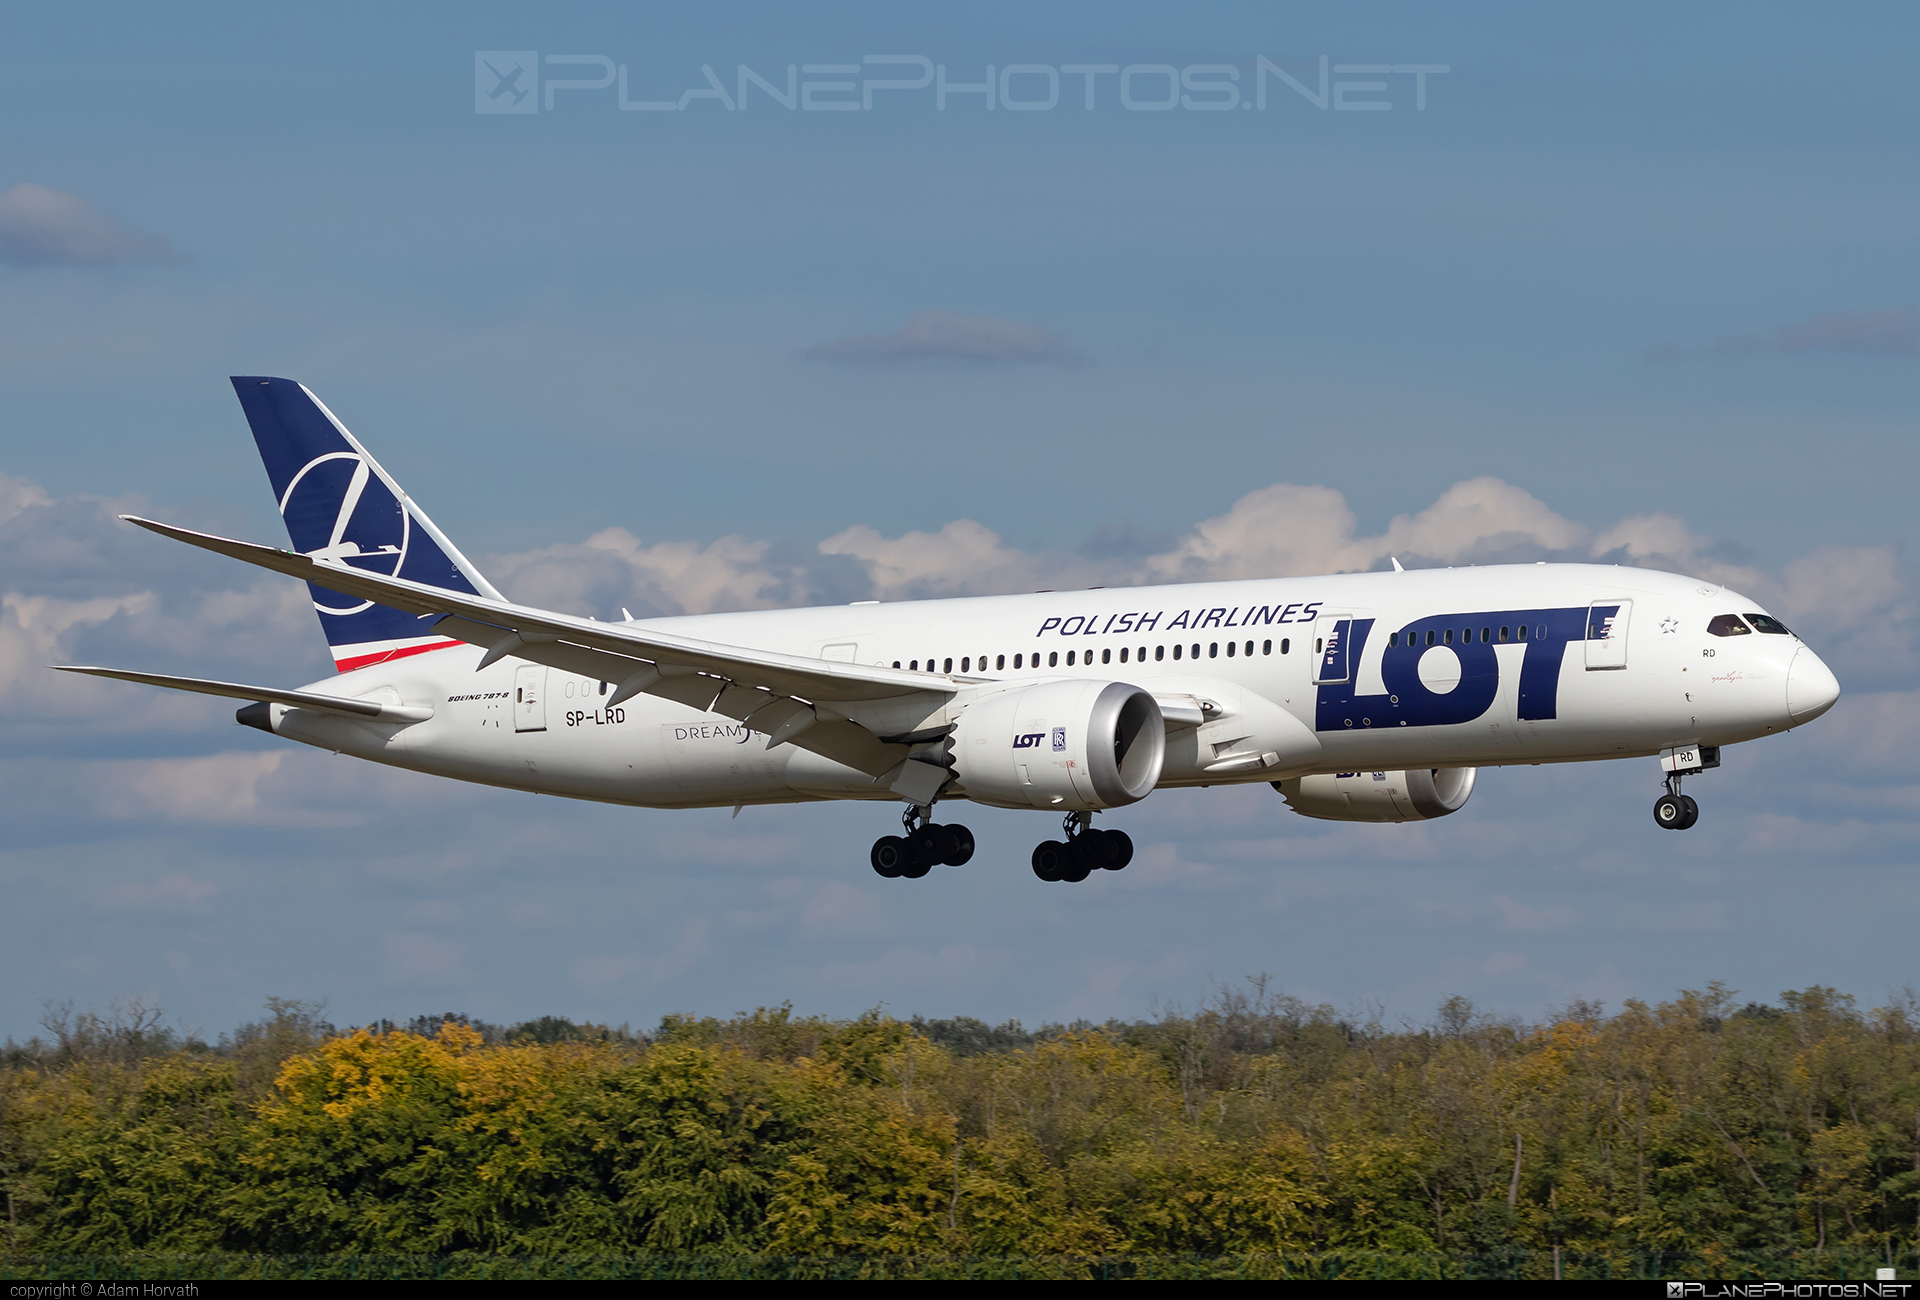 File:LOT Polish Airlines Boeing 787-8 SP-LRE (14020773270).jpg